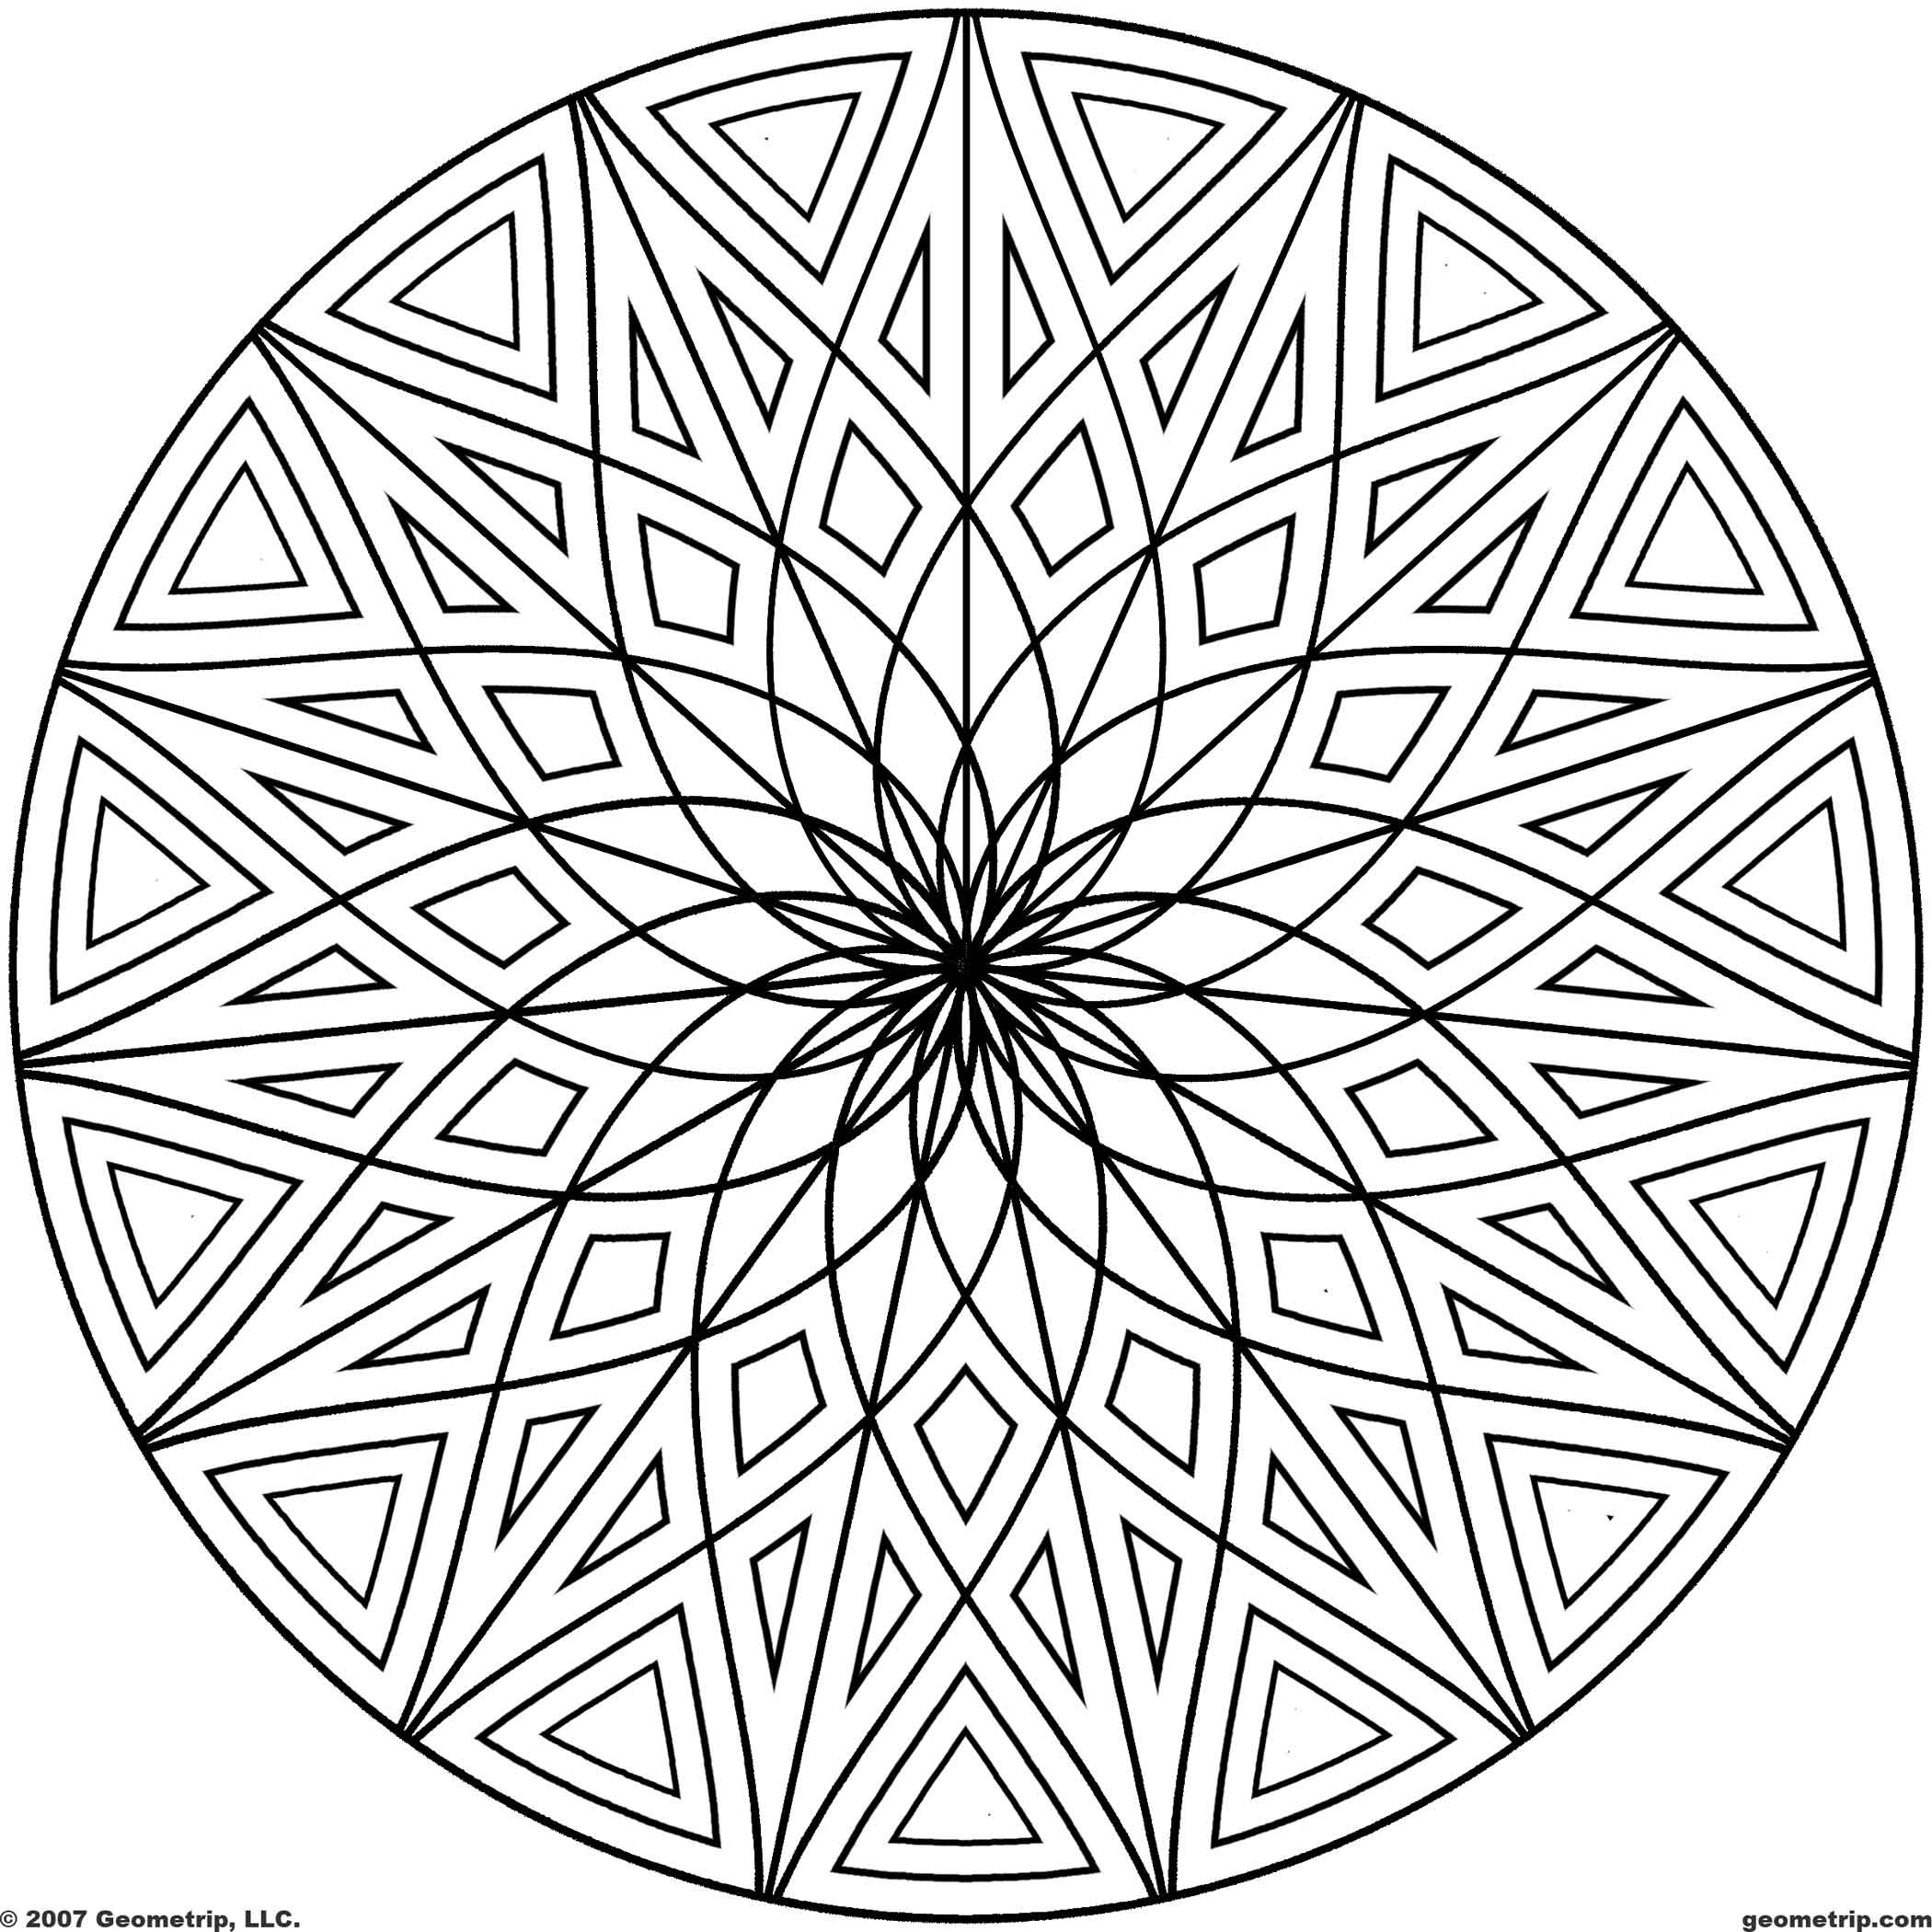 Cool Coloring Pictures - Coloring Pages for Kids and for Adults